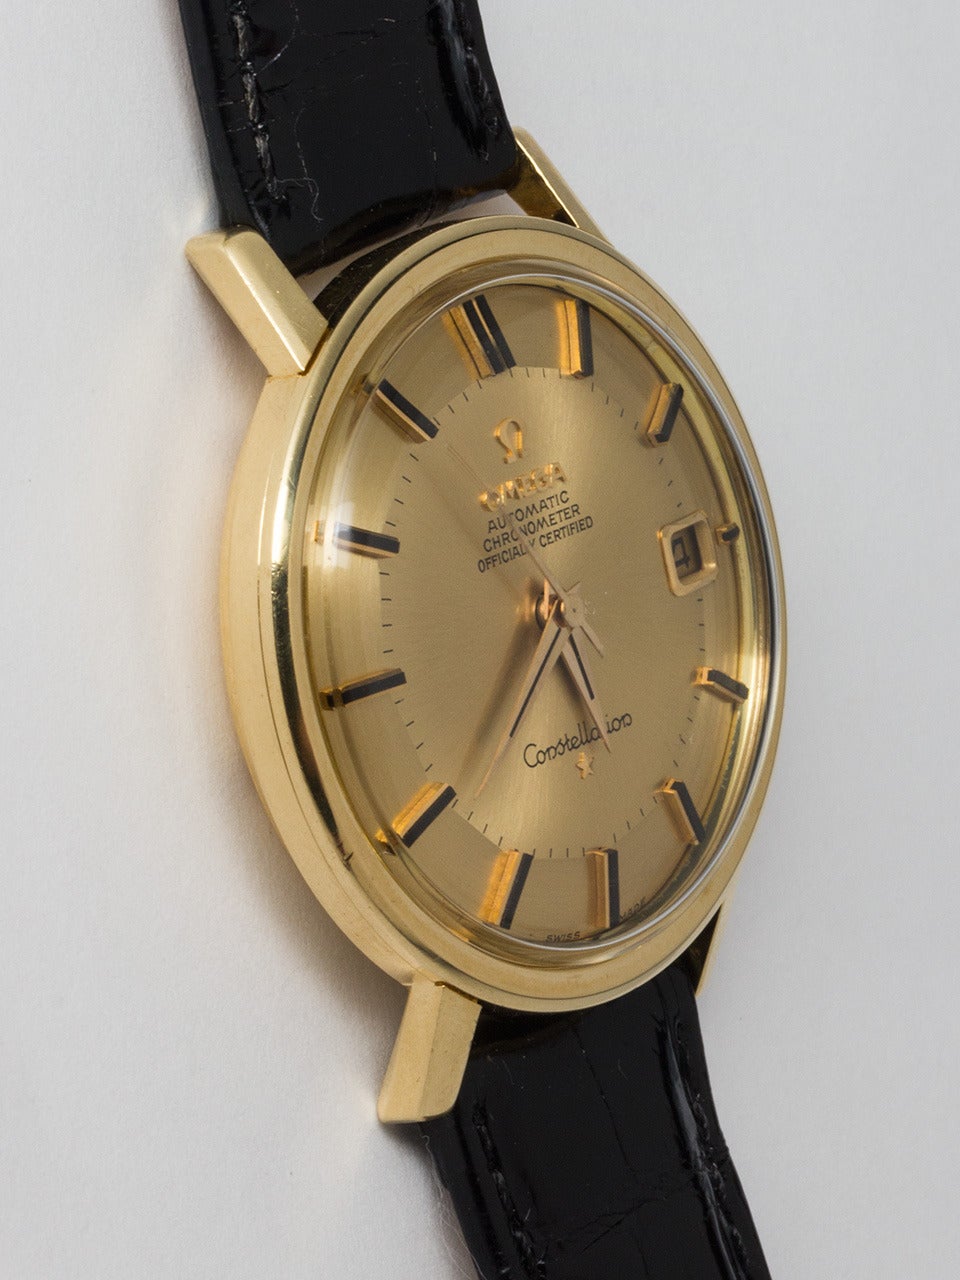 Omega 18K Yellow Gold Constellation Wristwatch, circa 1960s. 35mm case with screw down back with deeply engraved Observatory logo. Beautiful condition original champagne pie pan dial with applied gold indexes and tapered sword hands. High grade self